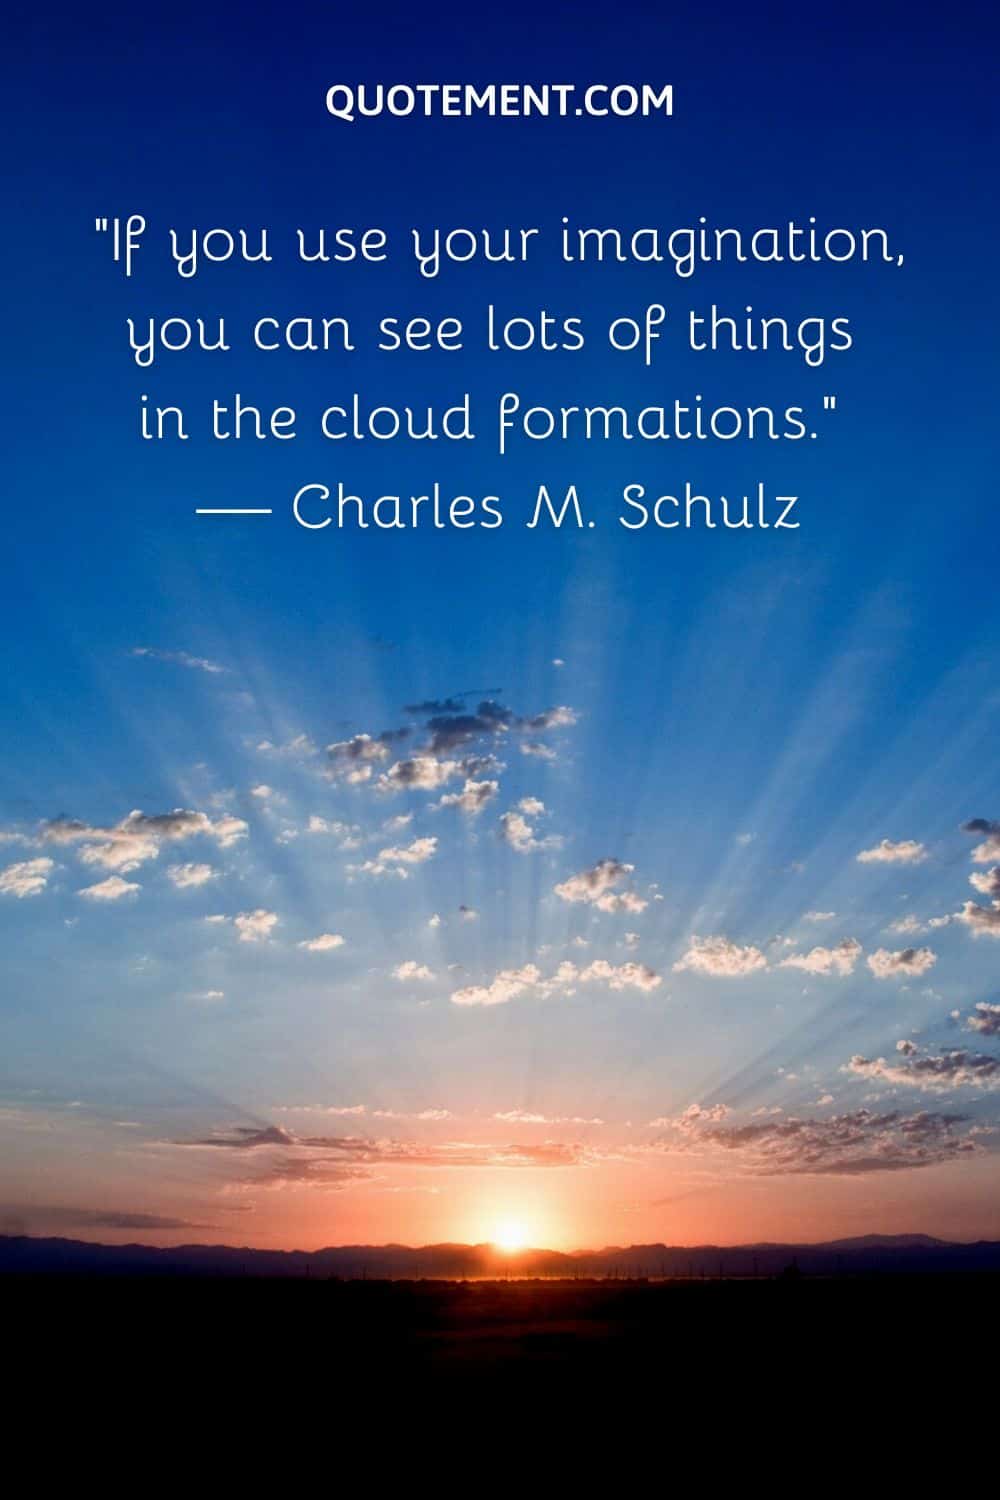 If you use your imagination, you can see lots of things in the cloud formations